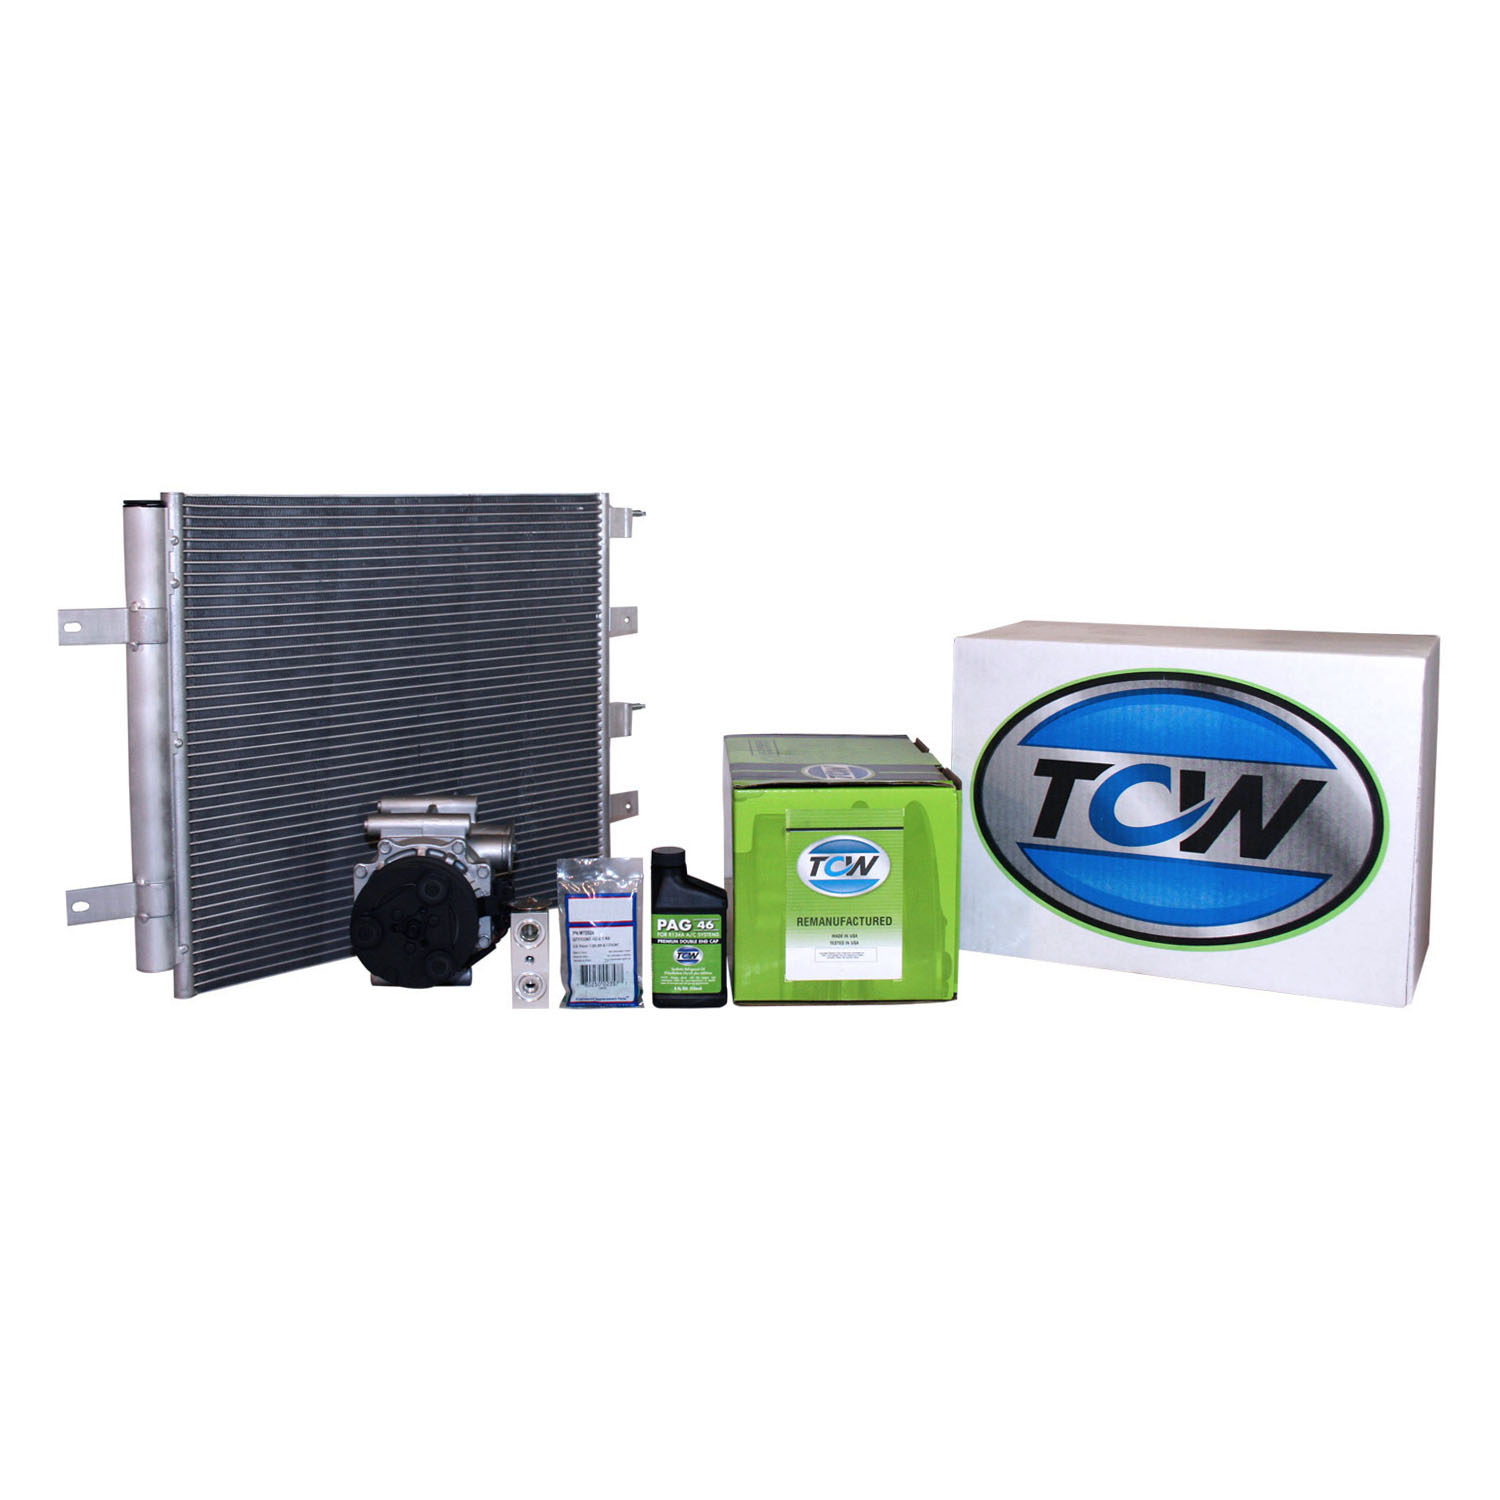 TCW Vehicle A/C Kit KC100065R Remanufactured Product Image field_60b6a13a6e67c